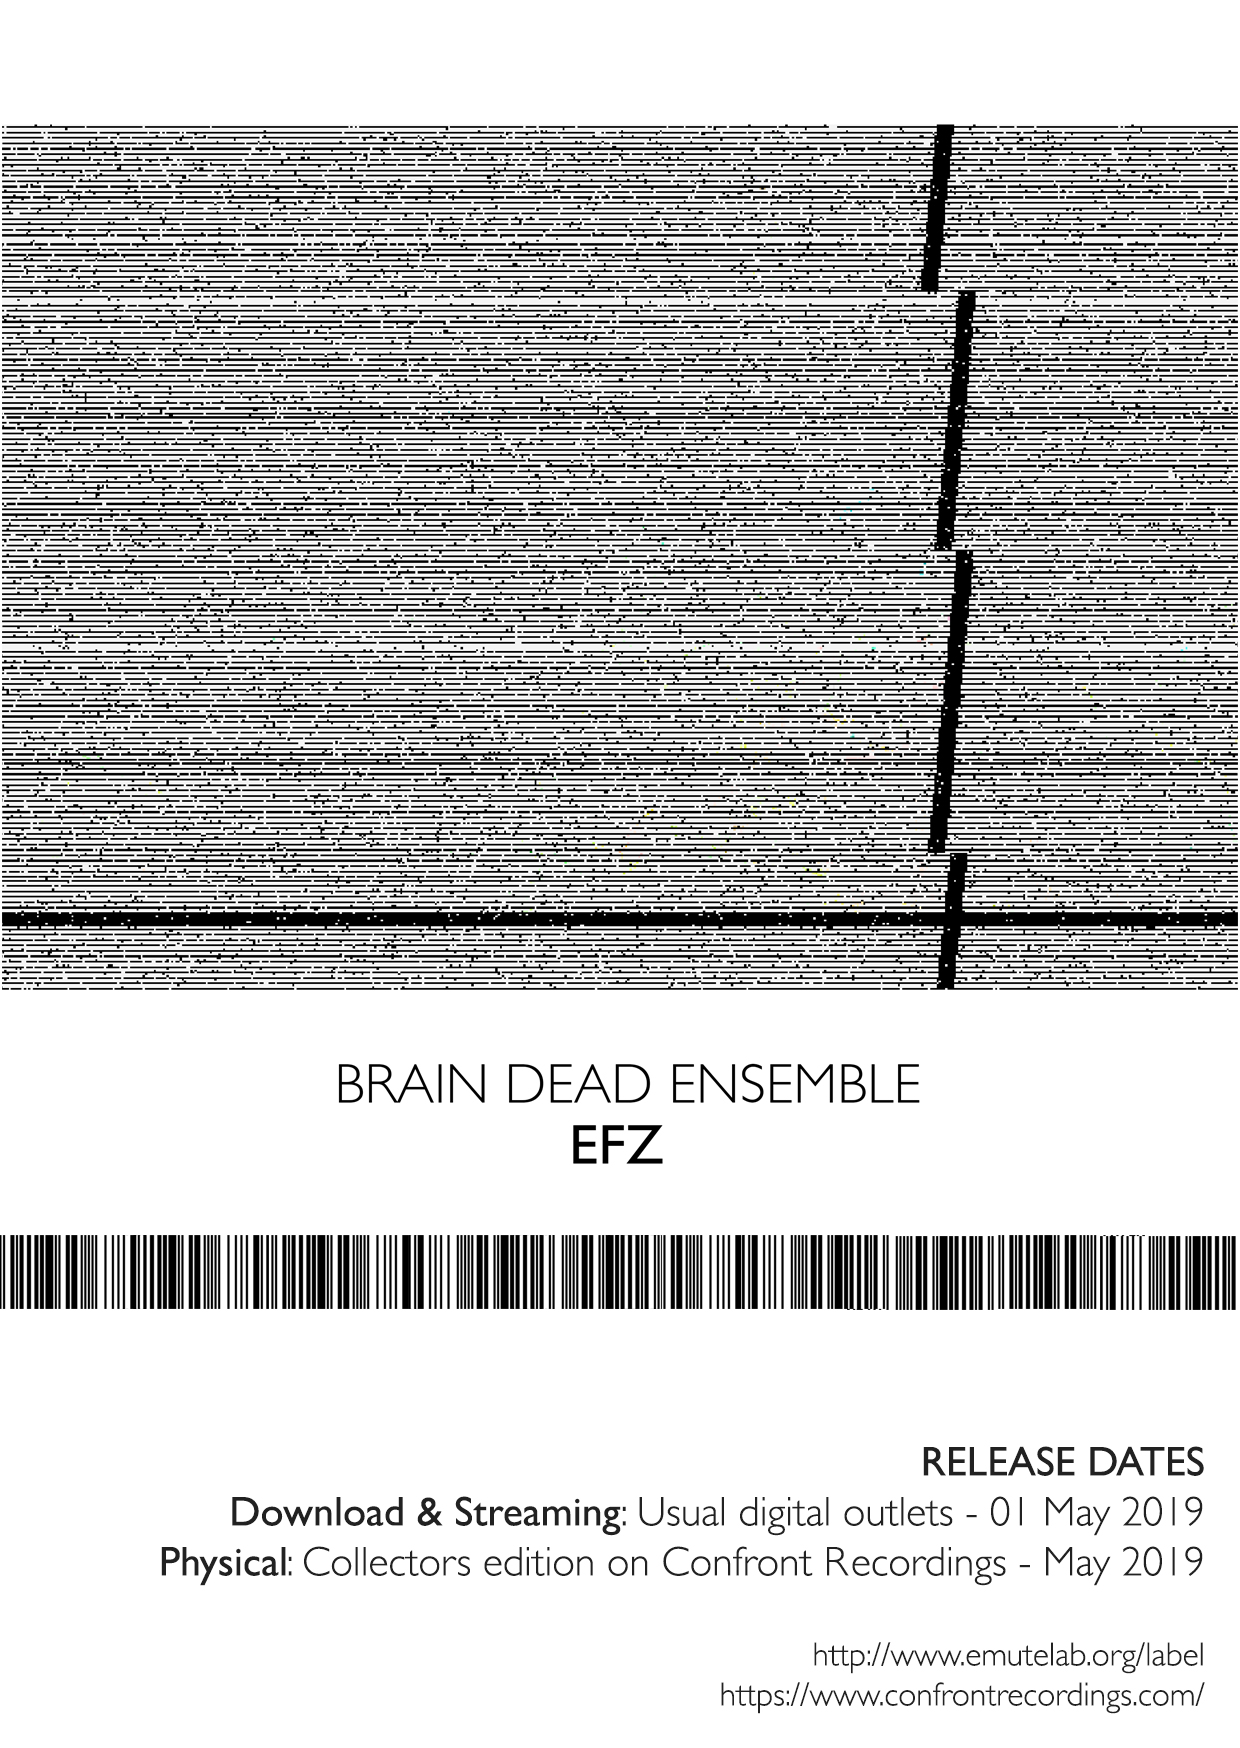 Flyer of BDE release